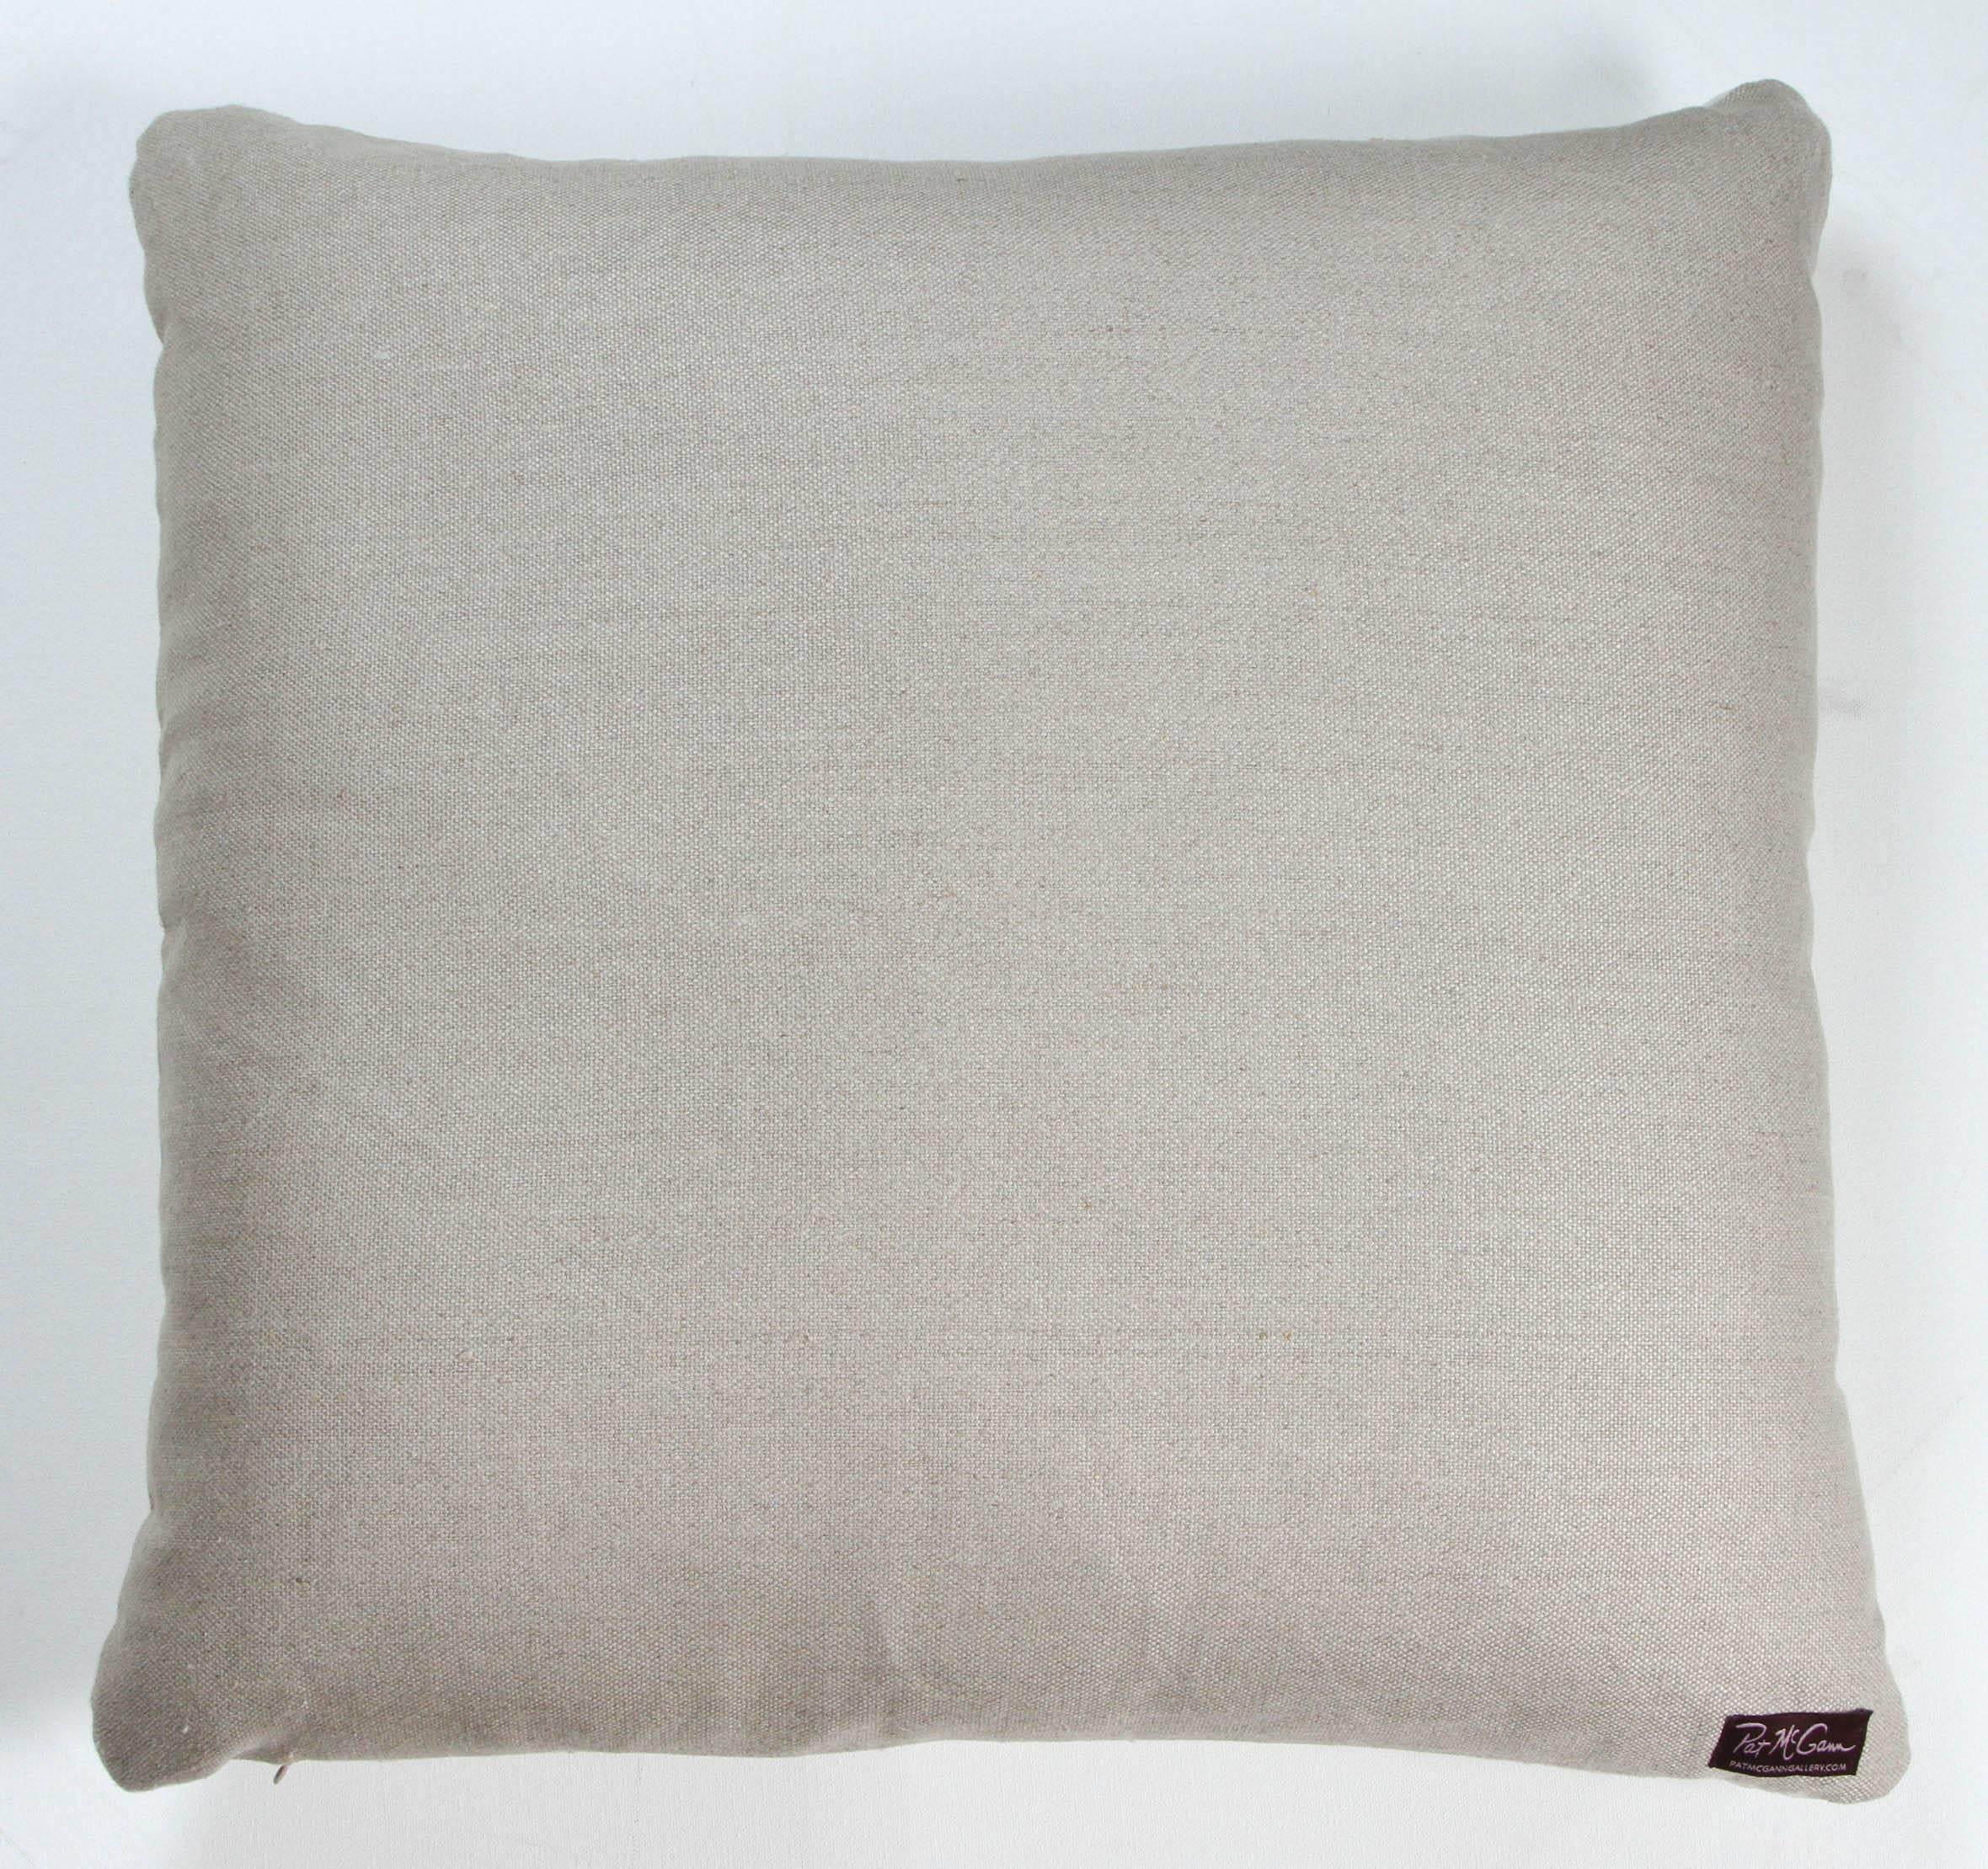 Cushion or pillow made from a Hausa Chief’s Robe, known as a Boubou. Hausa is the largest tribal group in Nigeria. Hand worked cotton floss embroidery over hand woven fabric made in narrow panels sewn together. Backed with natural linen, feather and